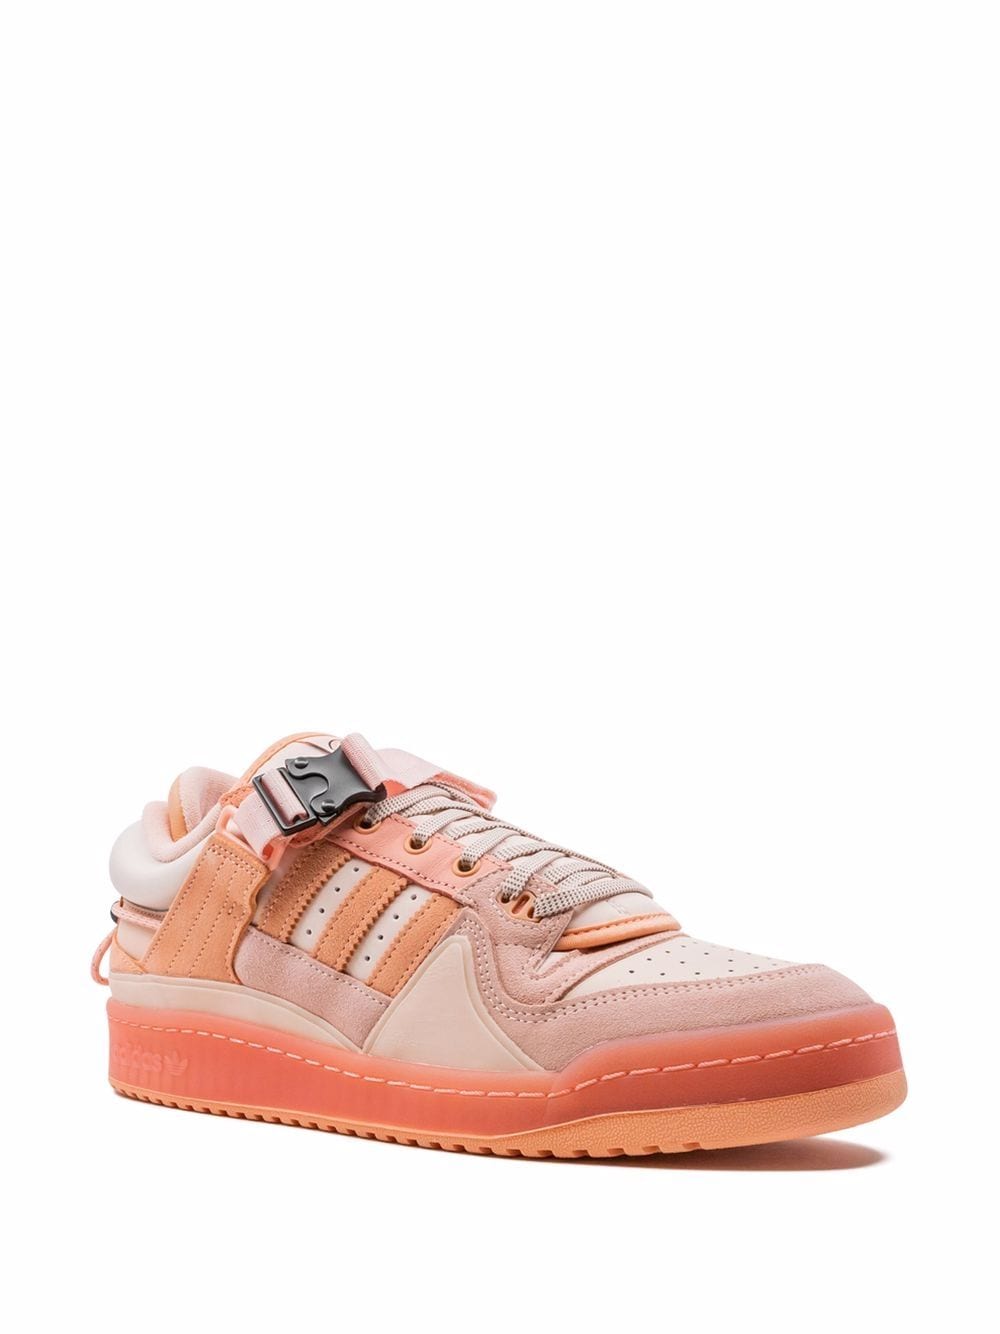 adidas x Bad Bunny Forum Buckle Low "Easter Egg" sneakers